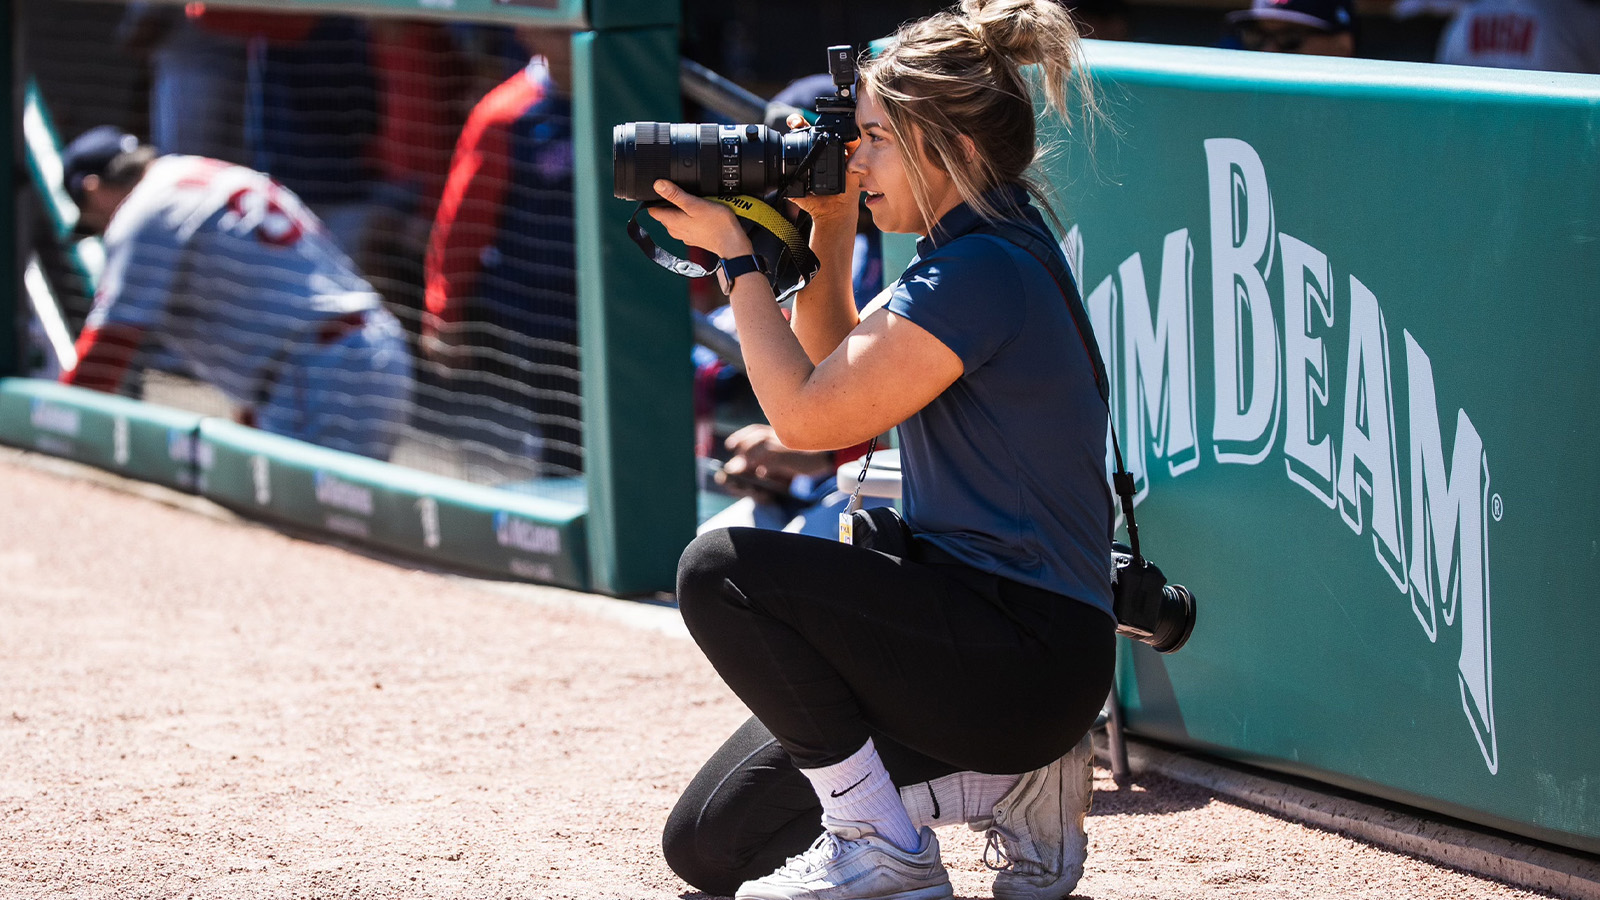 Woman with sandy brown hair wearing a blue shirt and black pants is crouching in front of a dugout with a camera in front of her face.